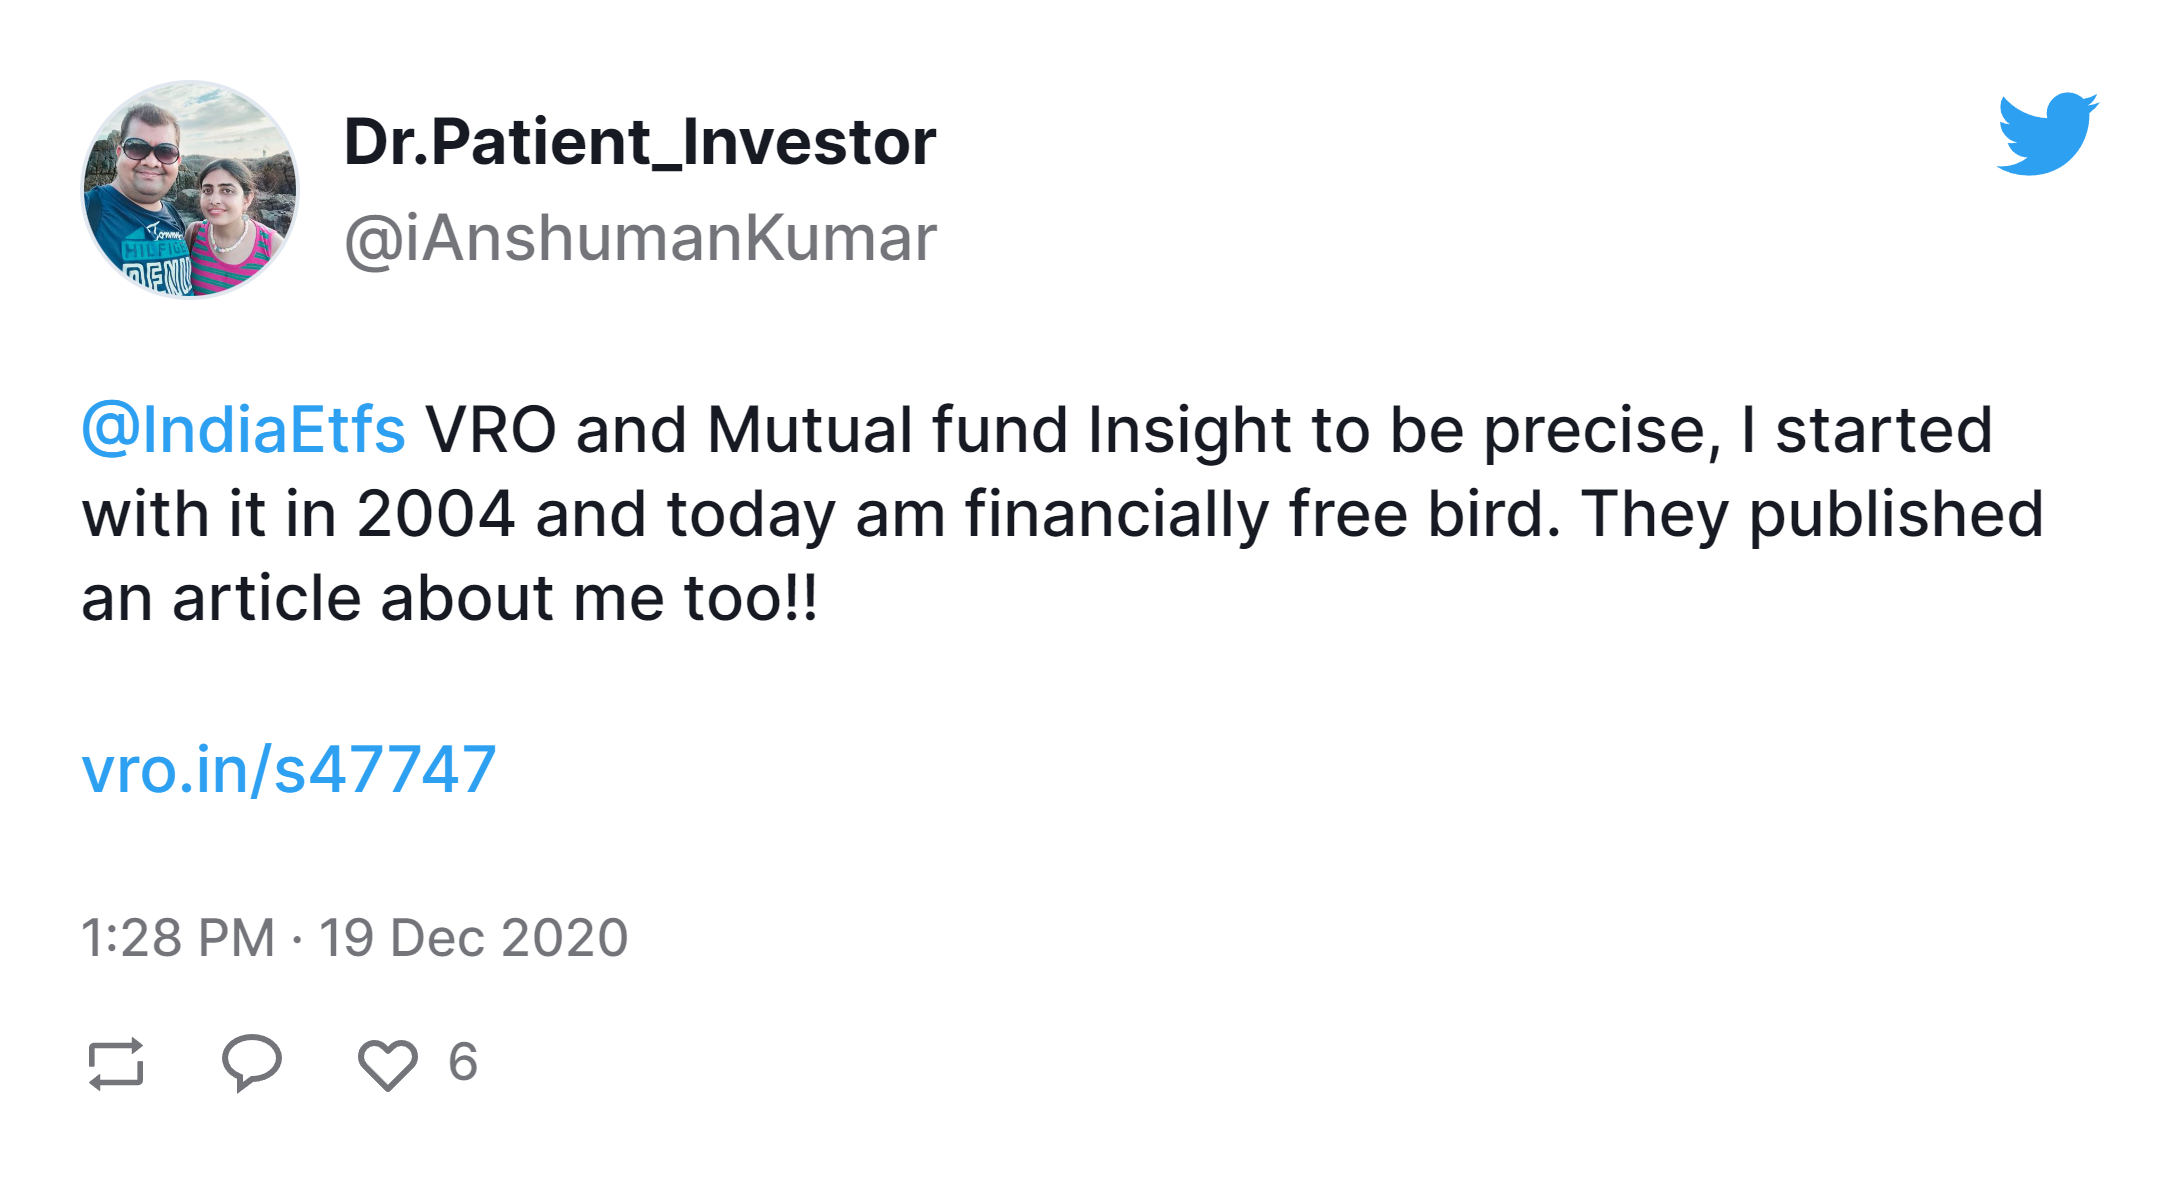 Dr.Patient_Investor post about value research